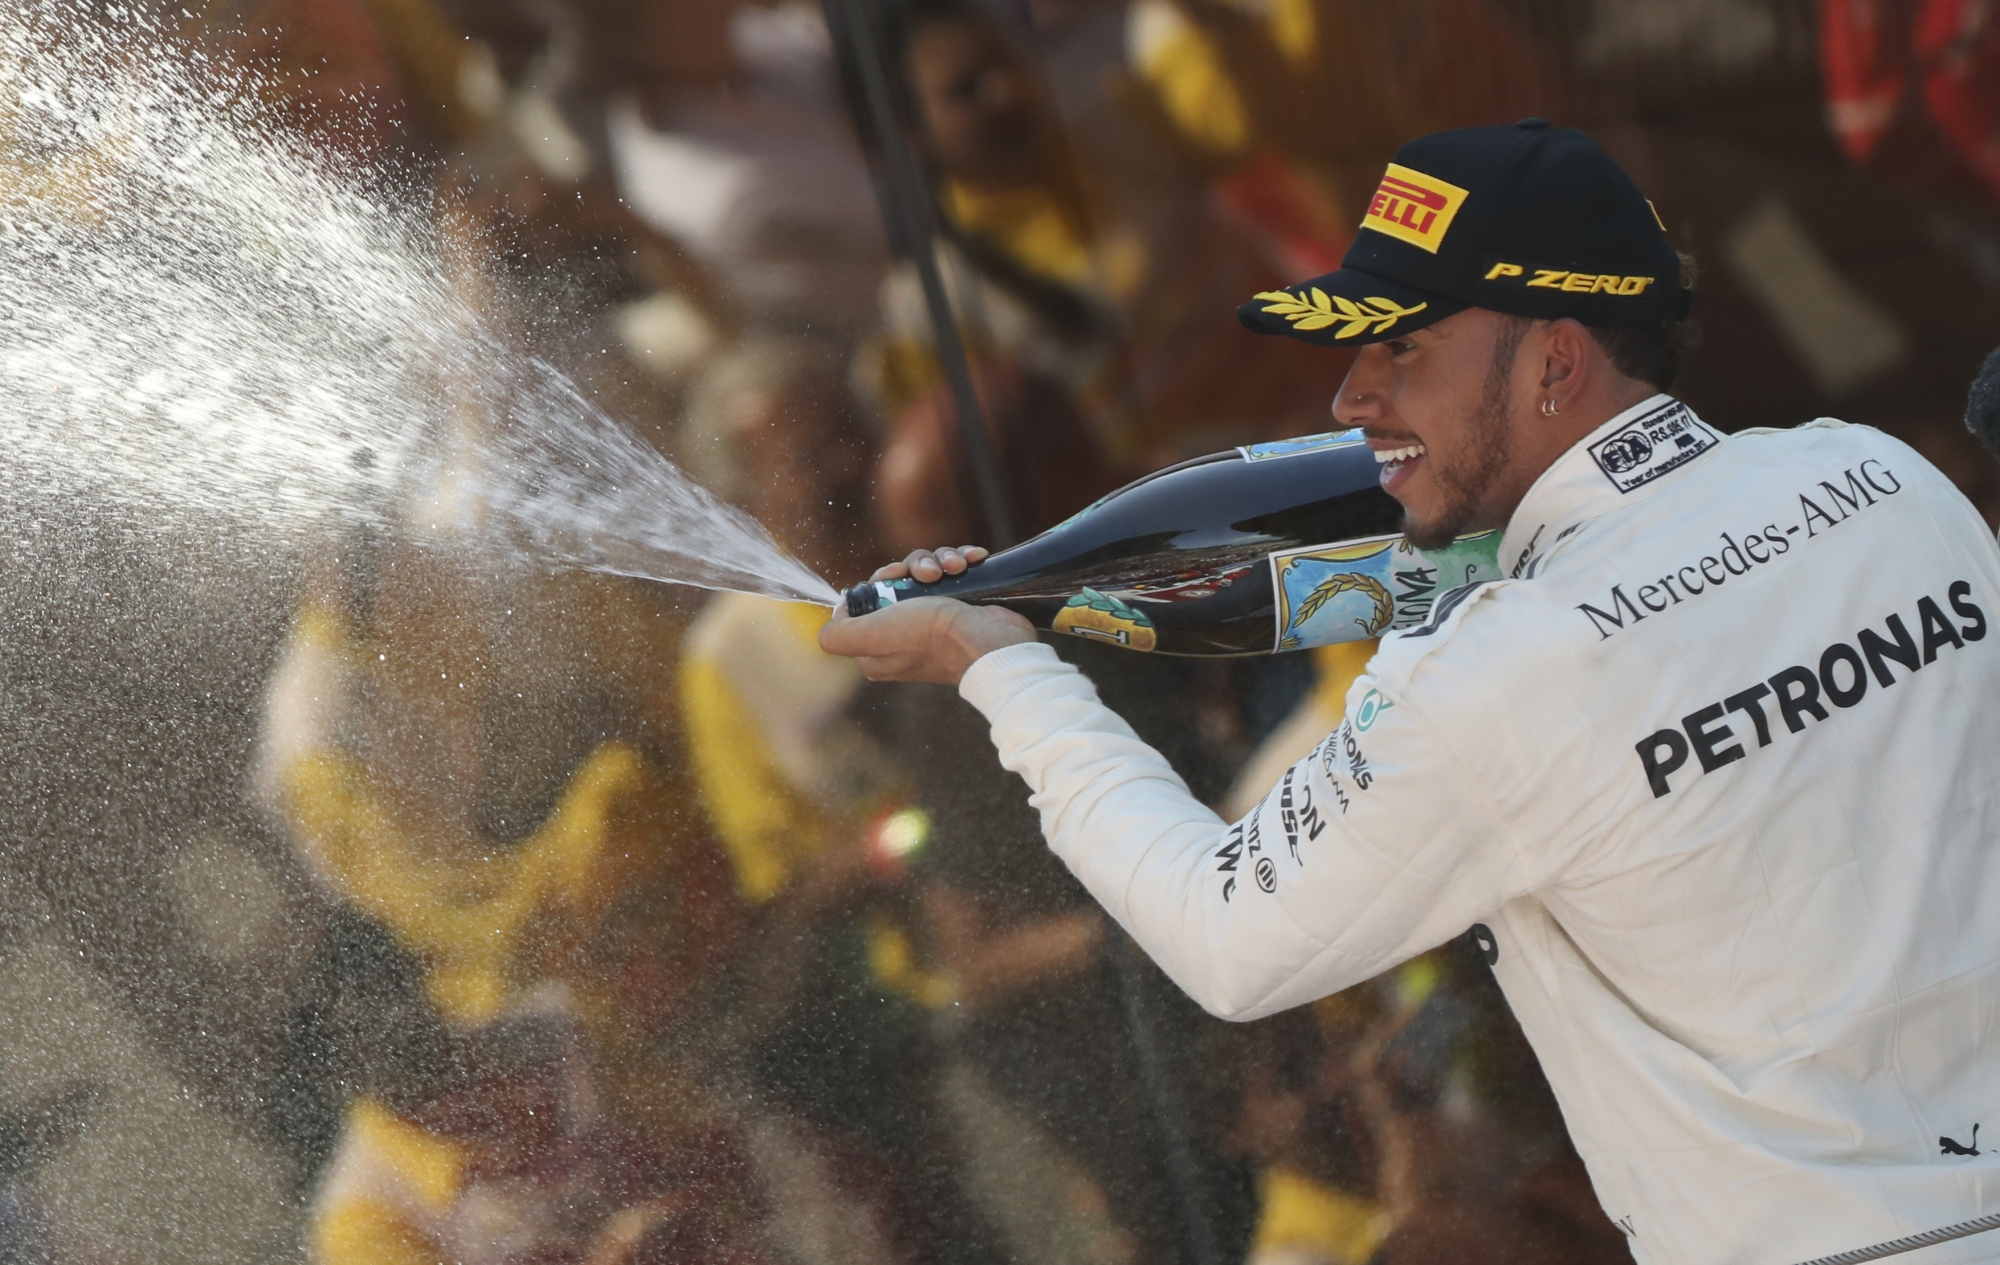 Mercedes driver Lewis Hamilton of Britain celebrates on the podium after winning the Spanish Formula One Grand Prix at the Barcelona Catalunya racetrack in Montmelo, Spain, Sunday, May 14, 2017. (AP Photo/Emilio Morenatti)